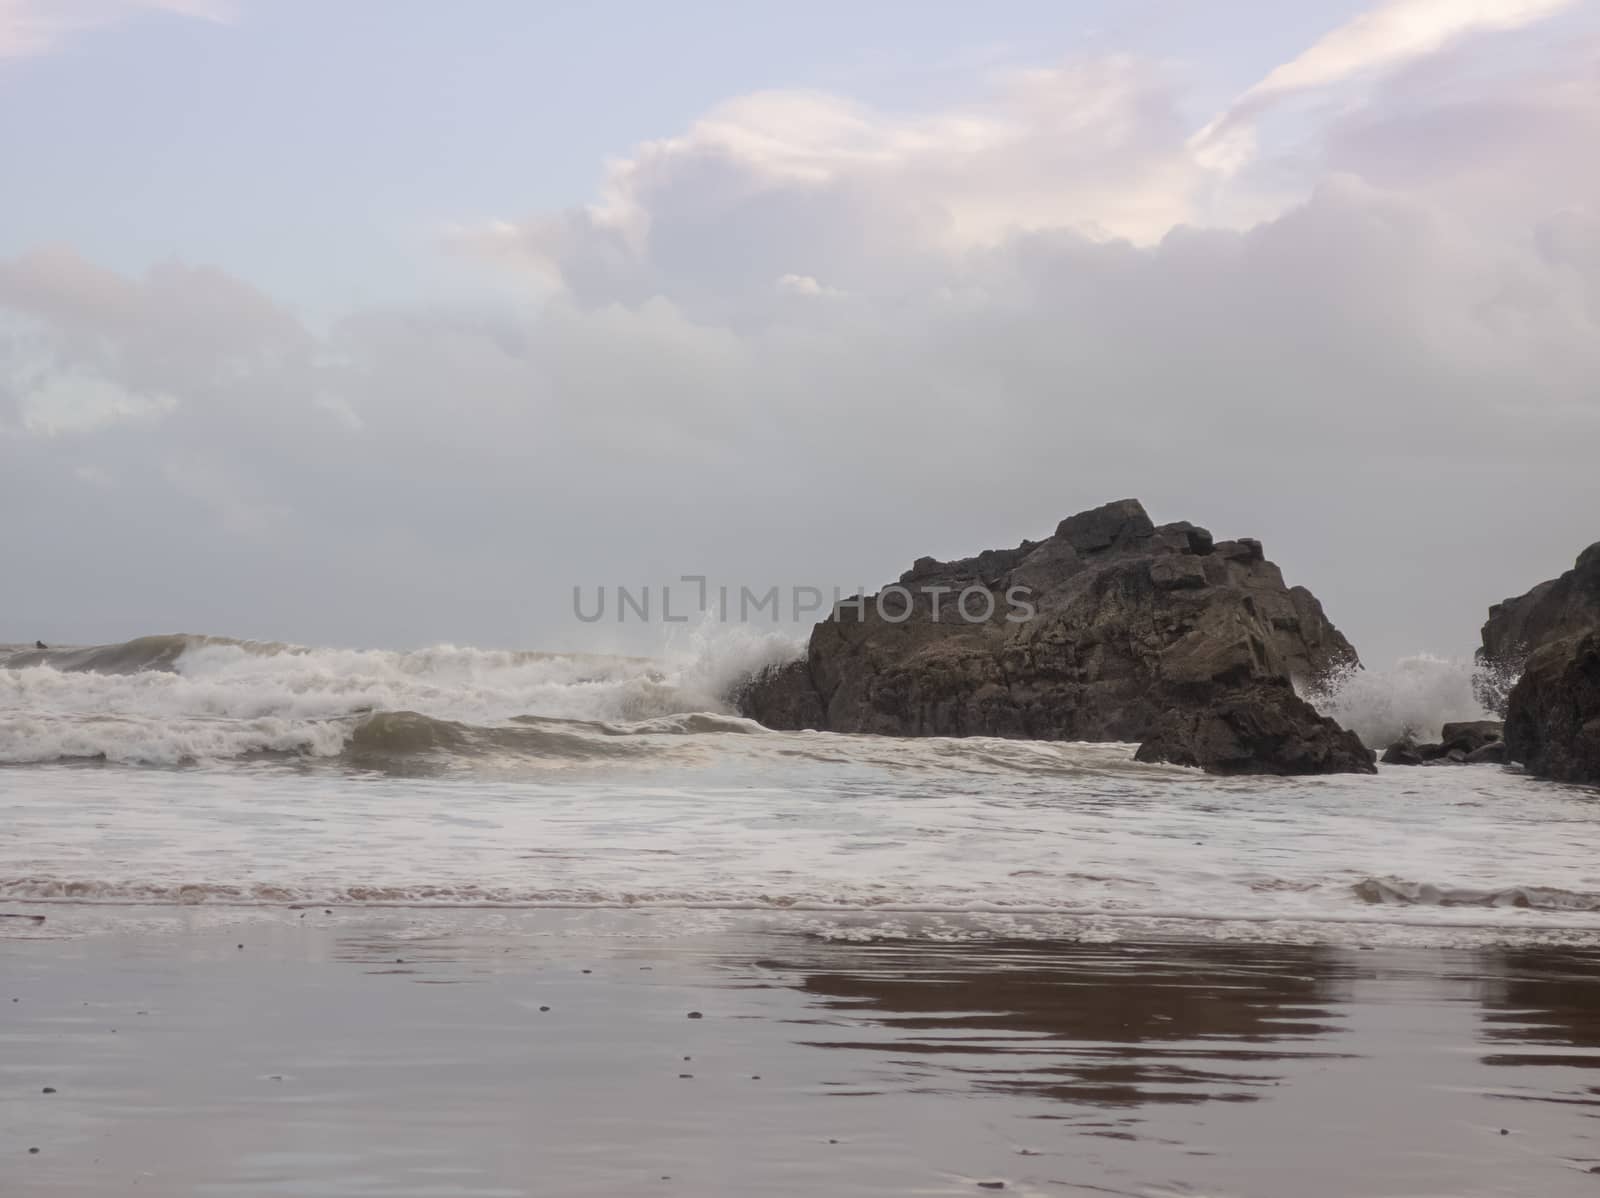 Waves crashing against a large rock as the tide moves in on Caswell Bay Beach, in Gower, Wales, UK. by WCLUK